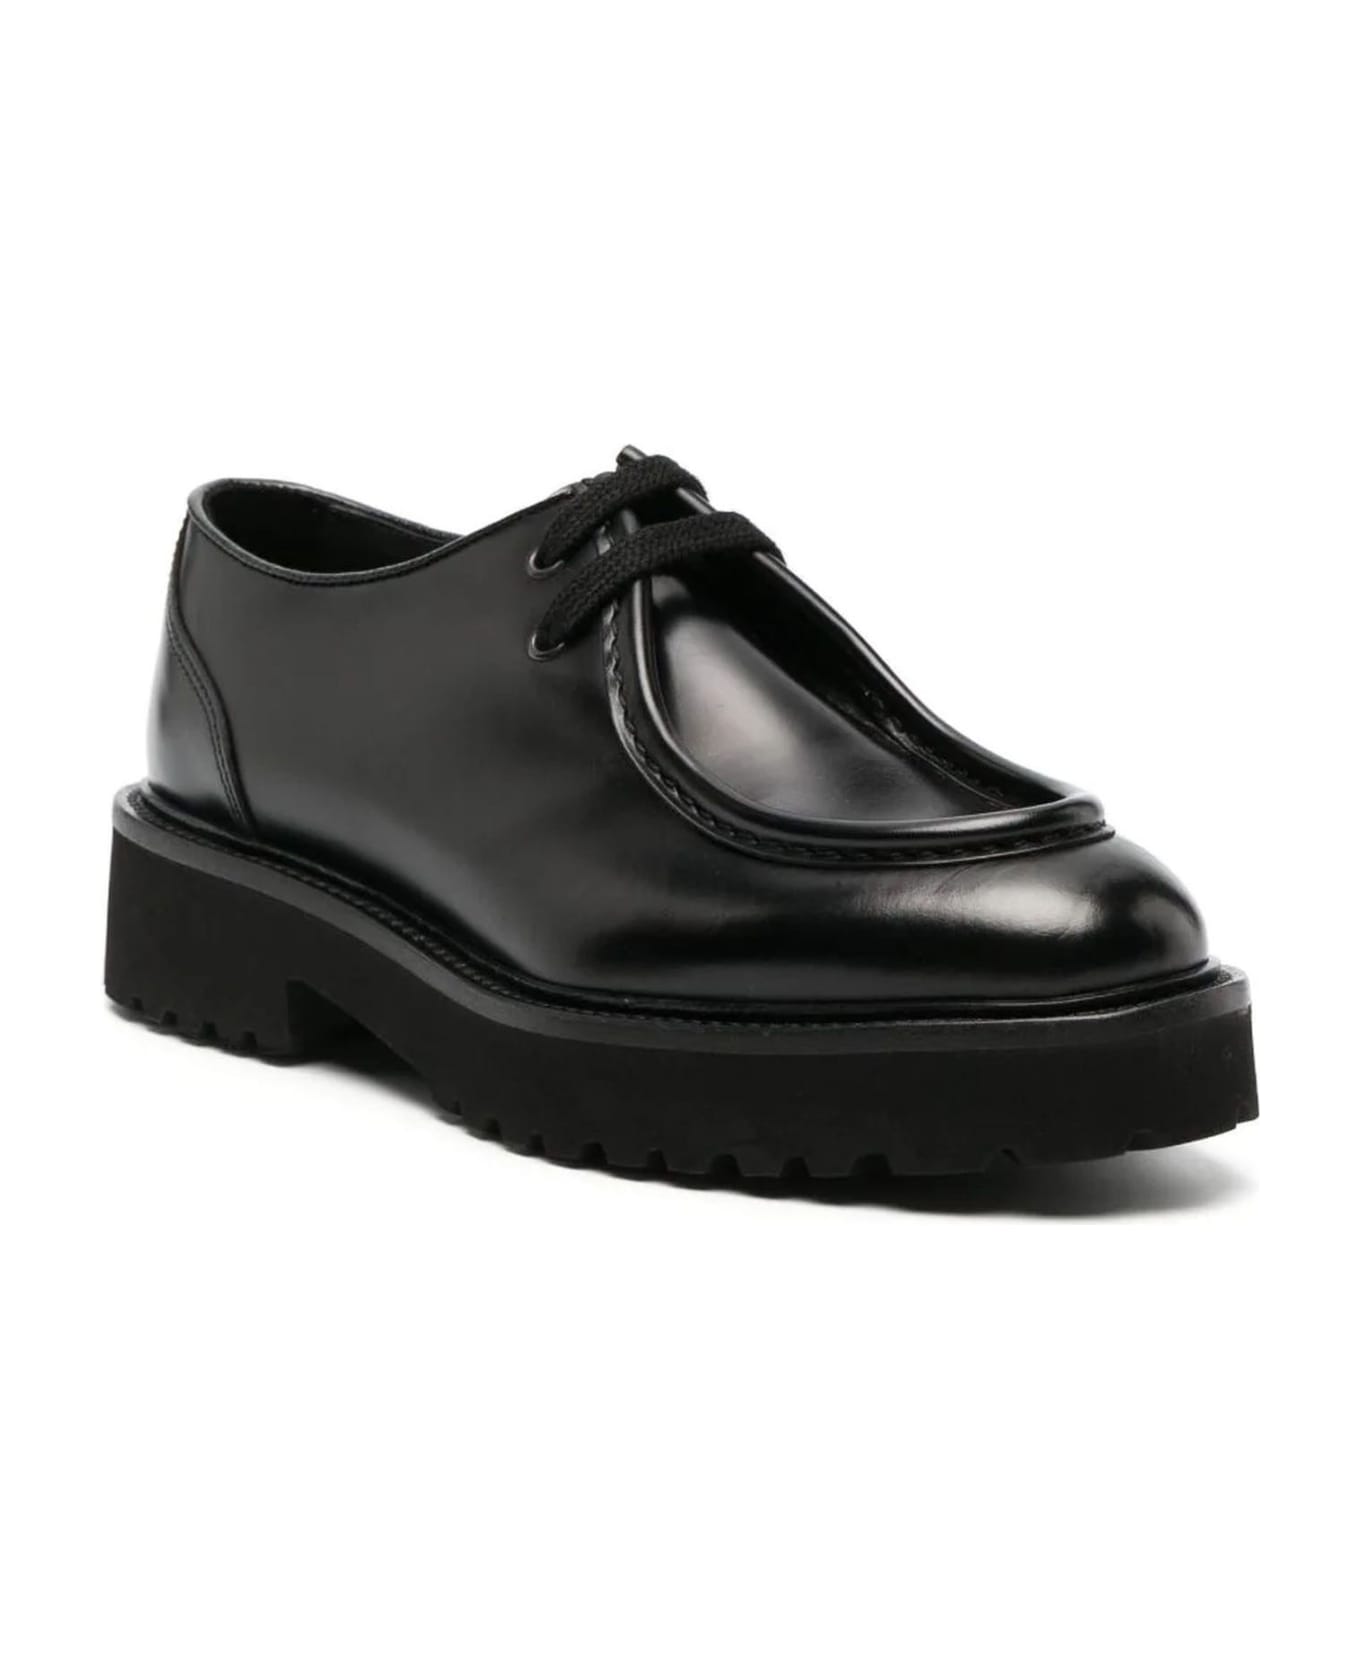 Doucal's Black Calf Leather Loafers - Black レースアップシューズ